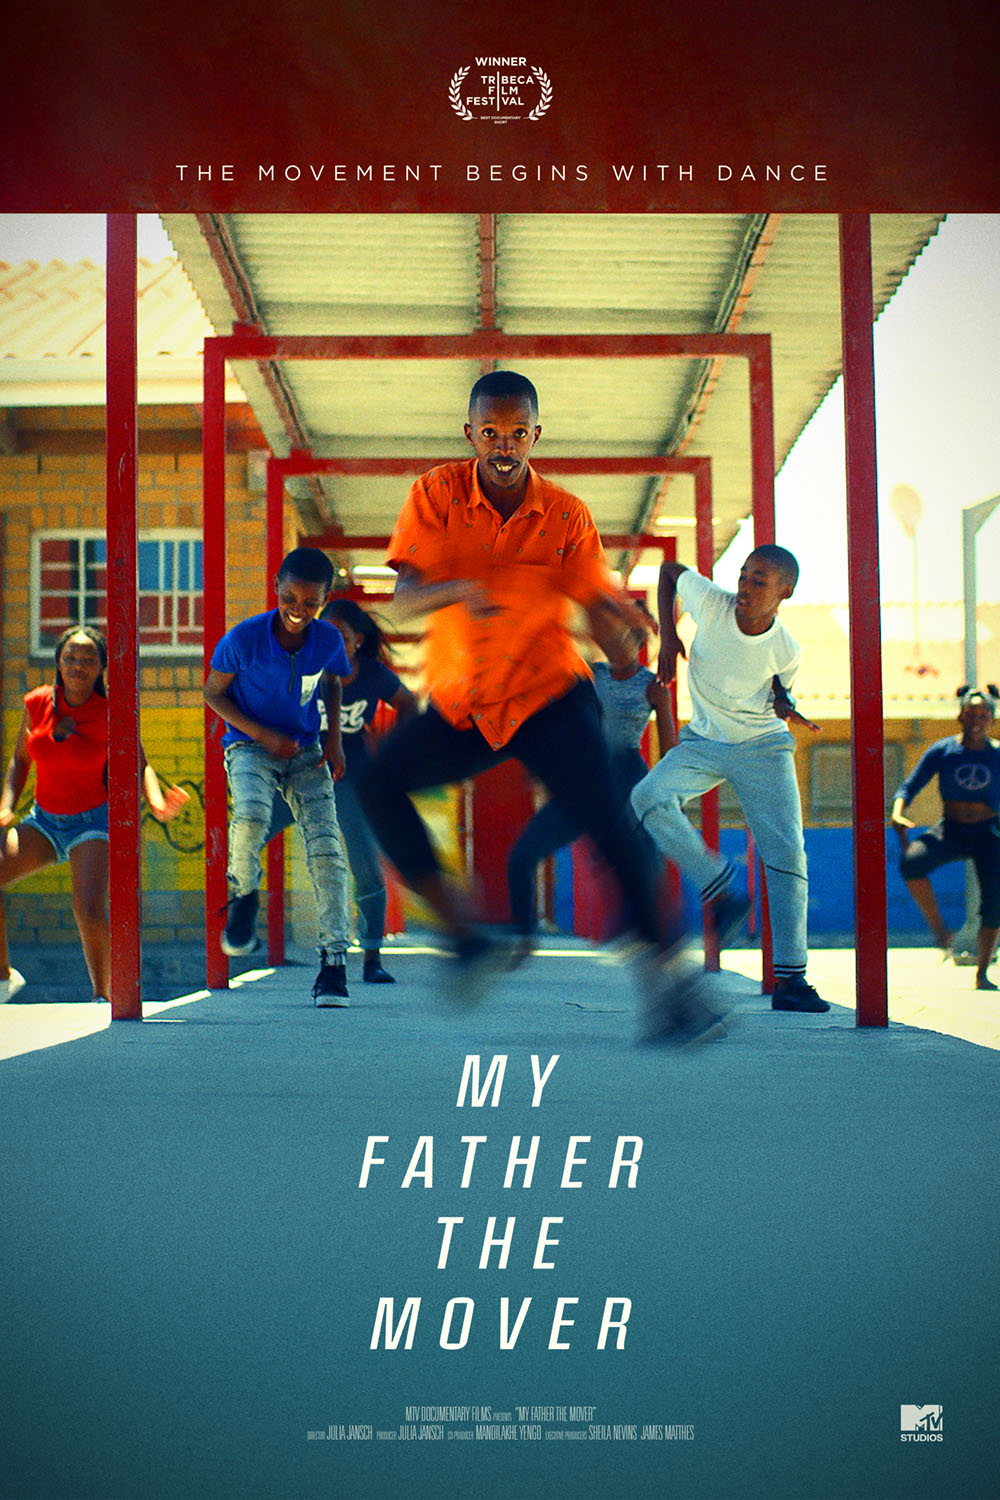 Movie poster for My Father The Mover, man and children dancing in school yard